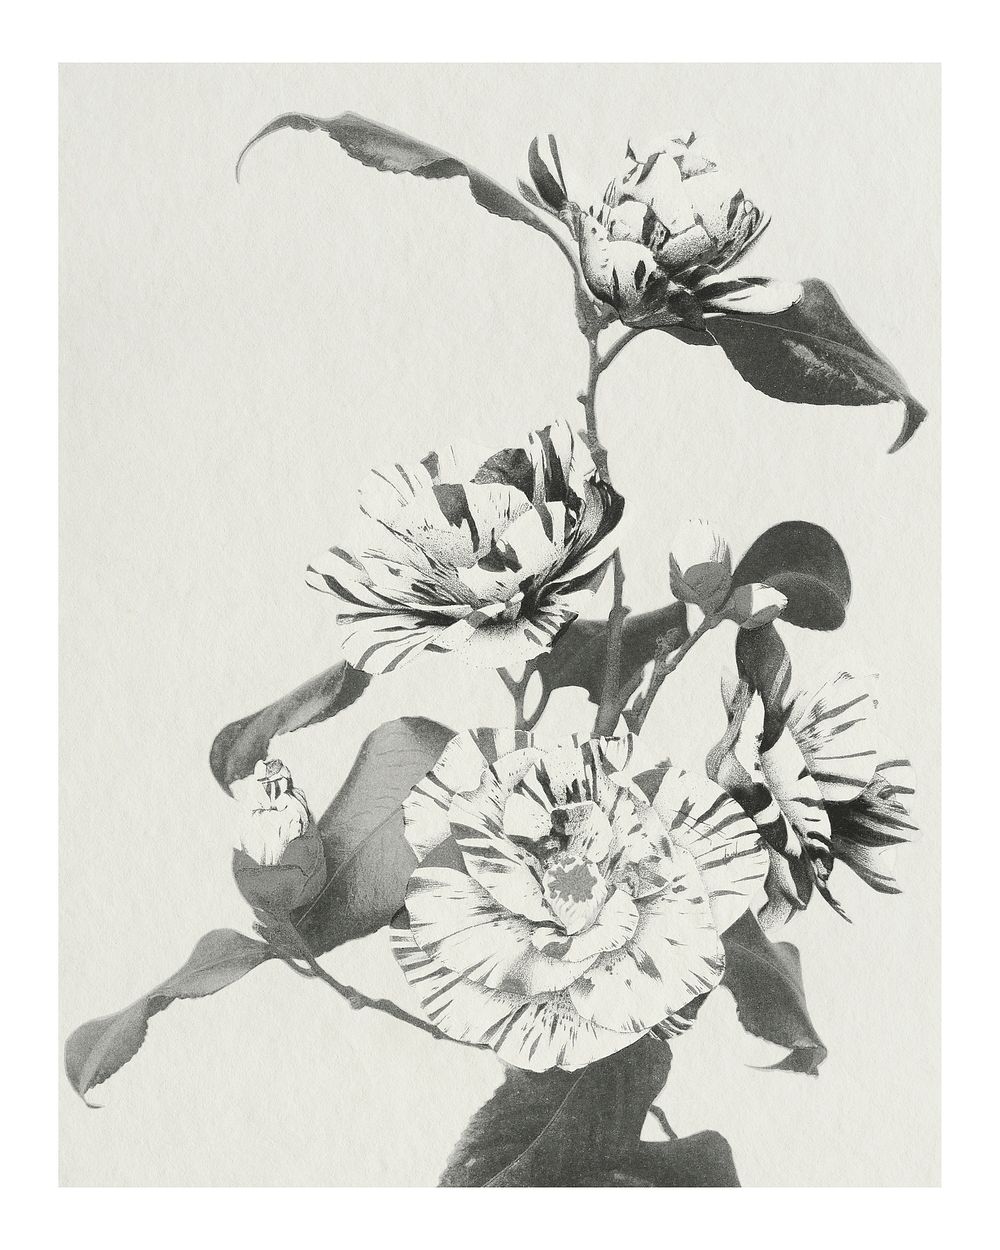 Striped Camellias grayscale vintage illustration artwork, remix from orginal photography.